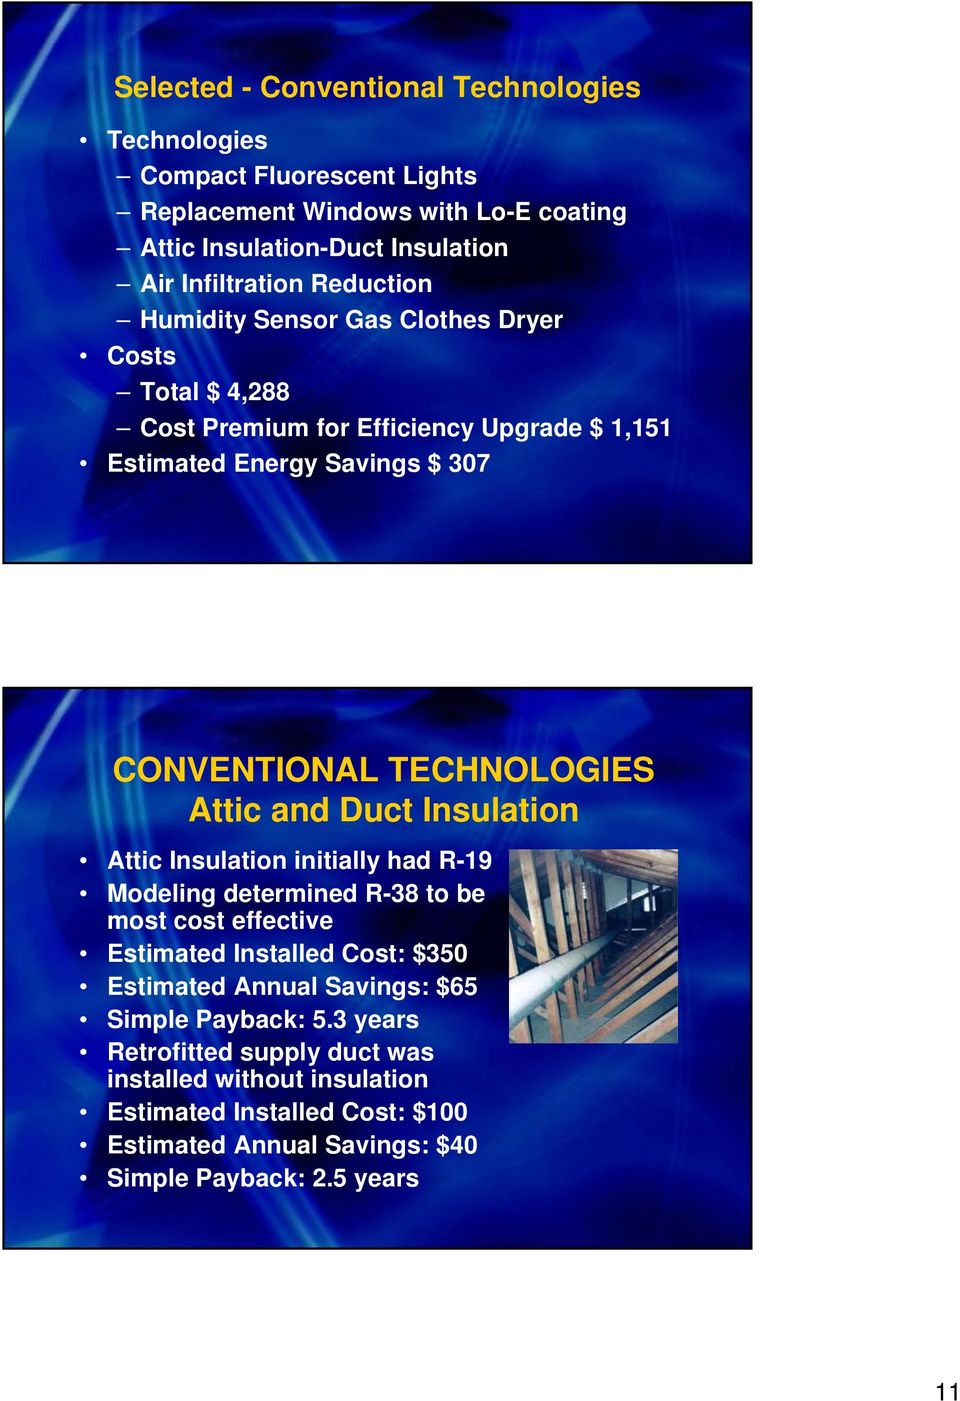 Attic and Duct Insulation Attic Insulation initially had R-19 Modeling determined R-38 to be most cost effective Estimated Installed Cost: $350 Estimated Annual